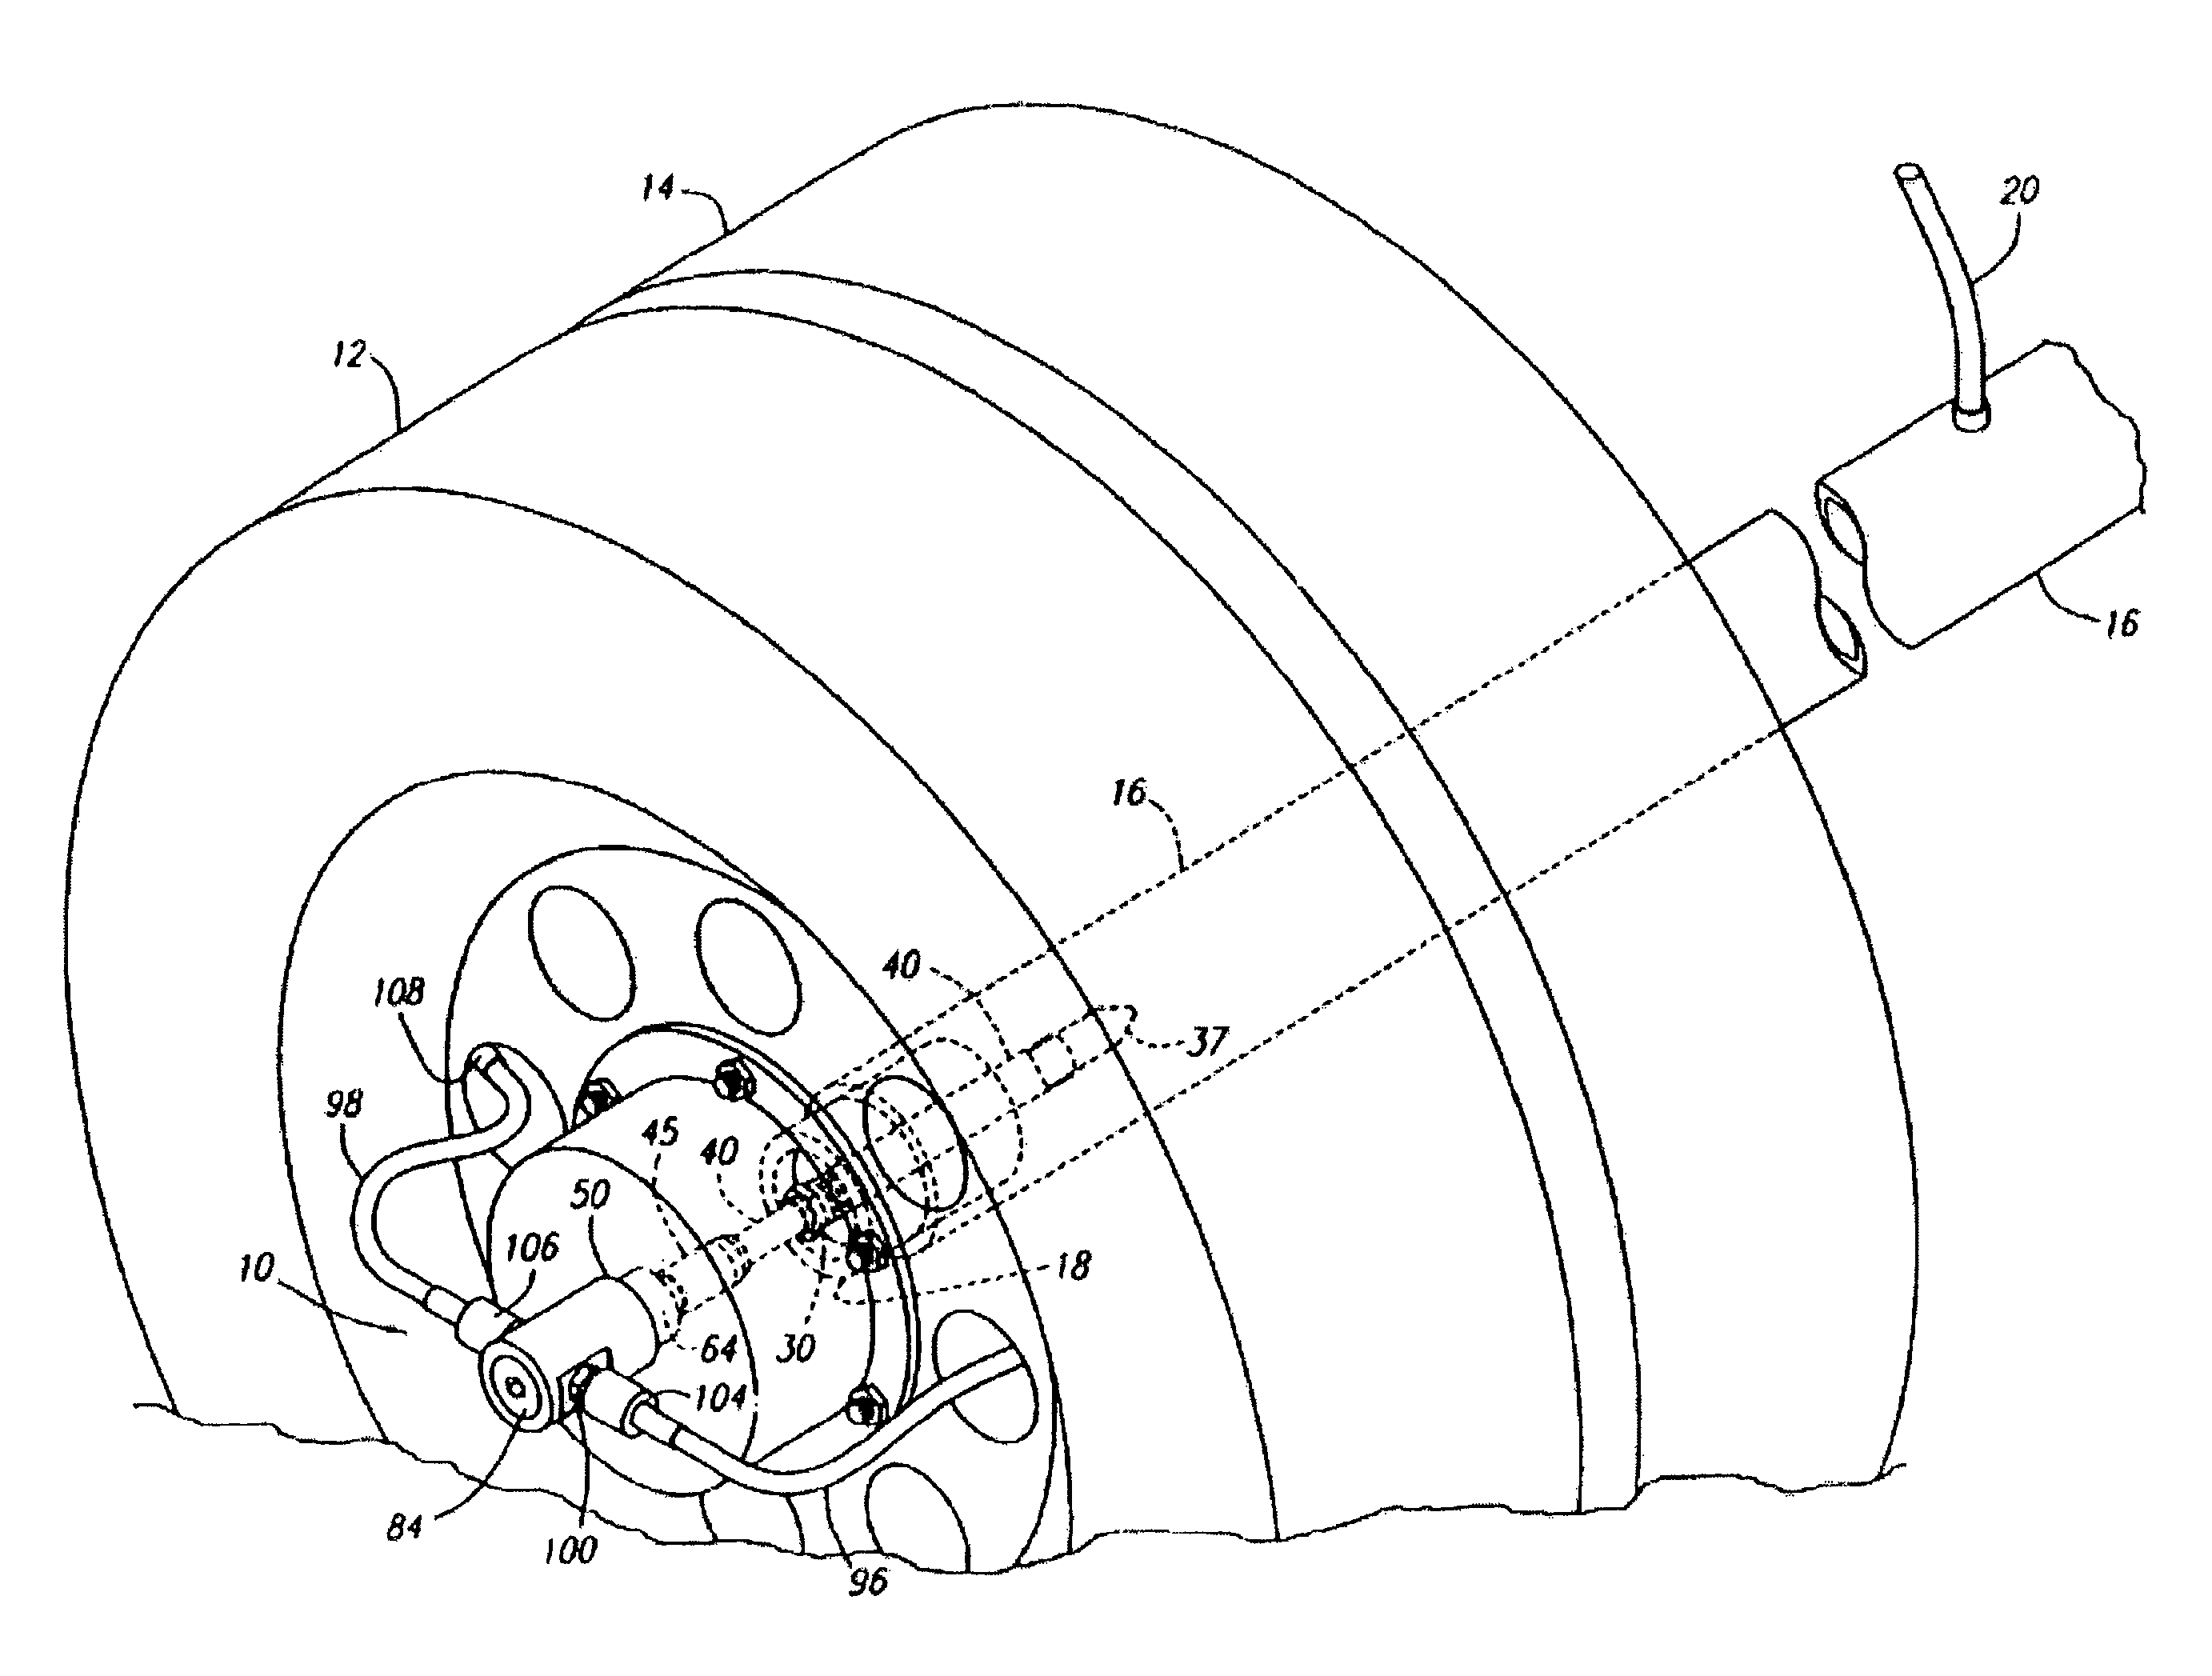 Inflation system for tires